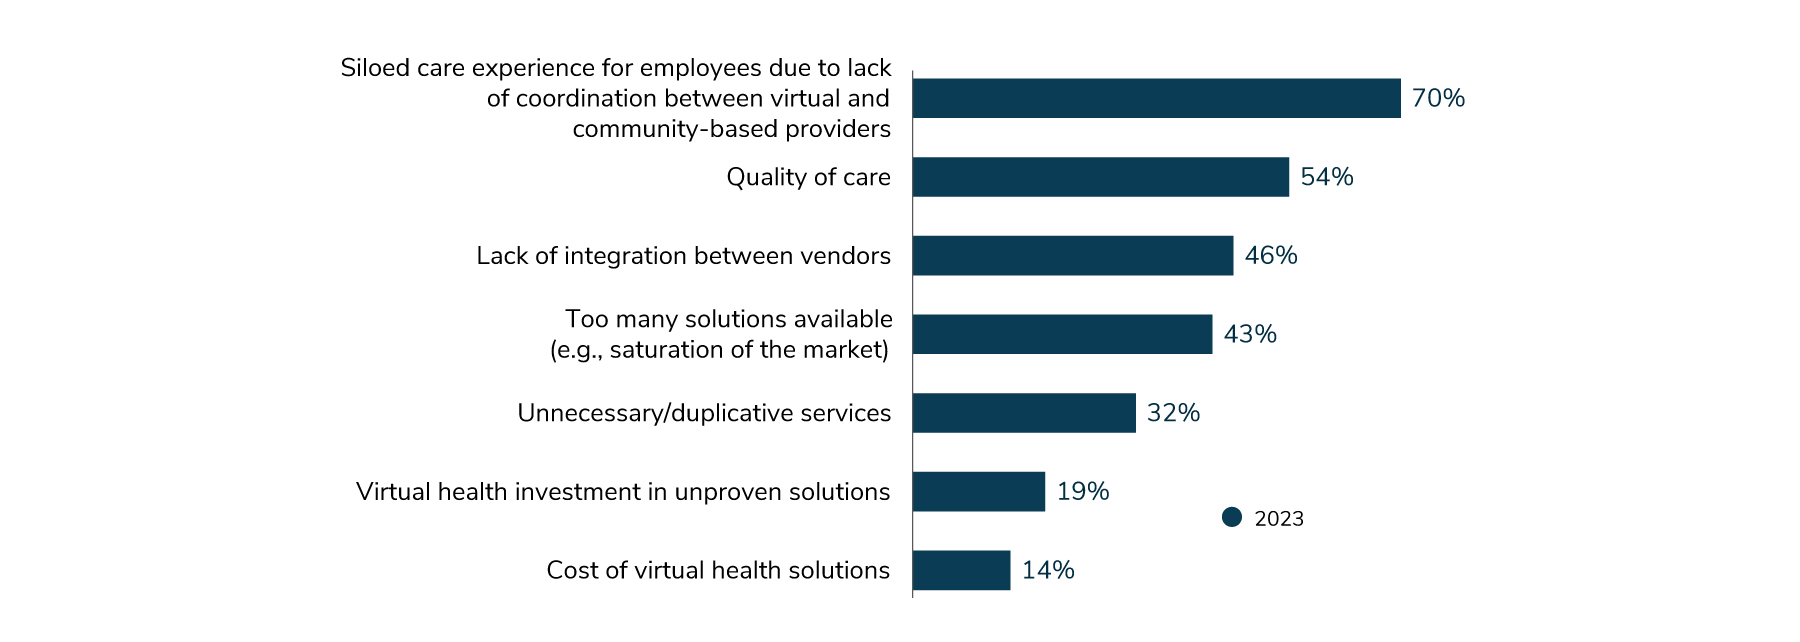 70% of employers reported that having concerns about a siloed care experience for employees due to a lack of coordination between virtual and community-based providers. 54% had concerns about the quality of care. 46% had concerns about a lack of integration between vendors. 43% (up from 26% in 2022) had concerns about too many solutions being available.